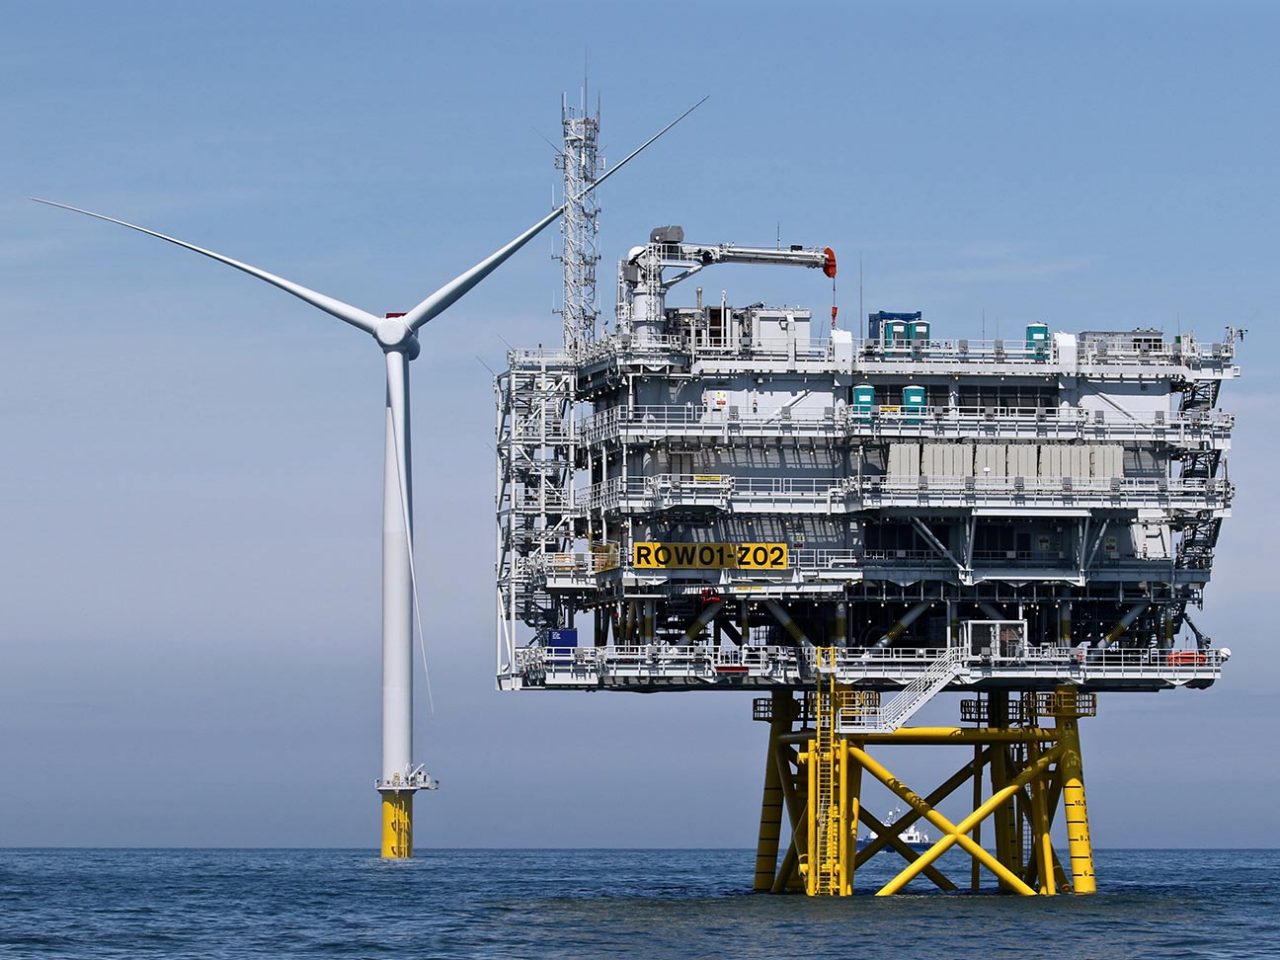 Building rig next to offshore wind turbine being built